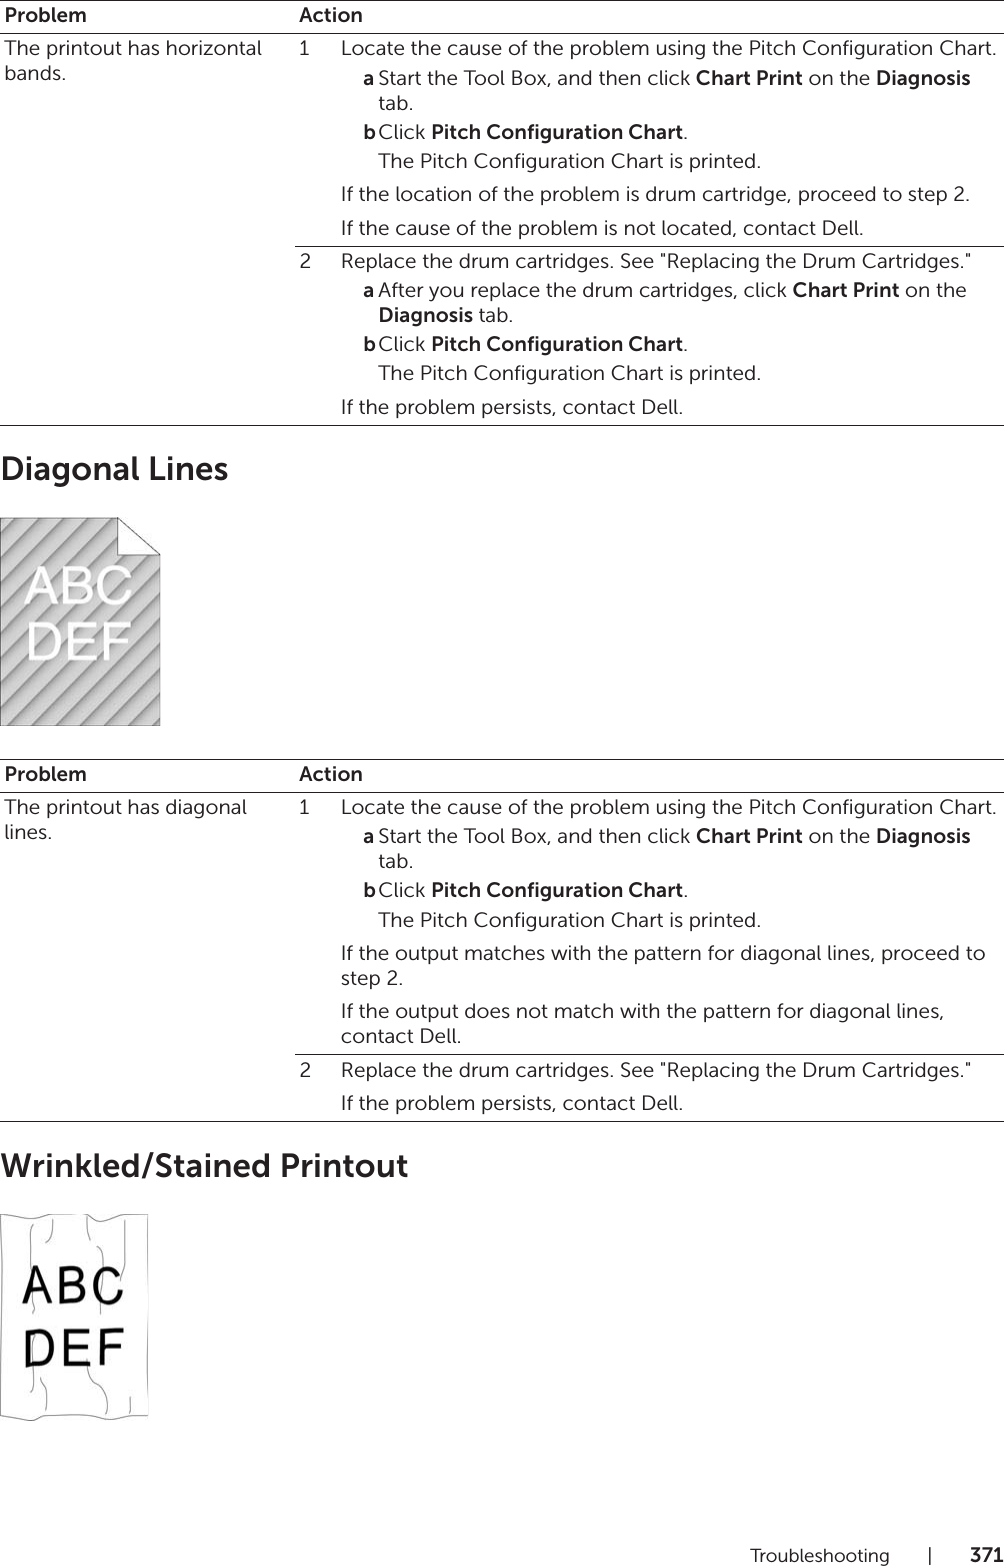 Troubleshooting |371Diagonal LinesWrinkled/Stained PrintoutProblem ActionThe printout has horizontal bands.1 Locate the cause of the problem using the Pitch Configuration Chart.aStart the Tool Box, and then click Chart Print on the Diagnosis tab.bClick Pitch Configuration Chart.The Pitch Configuration Chart is printed.If the location of the problem is drum cartridge, proceed to step 2.If the cause of the problem is not located, contact Dell.2 Replace the drum cartridges. See &quot;Replacing the Drum Cartridges.&quot;aAfter you replace the drum cartridges, click Chart Print on the Diagnosis tab.bClick Pitch Configuration Chart.The Pitch Configuration Chart is printed.If the problem persists, contact Dell.Problem ActionThe printout has diagonal lines.1 Locate the cause of the problem using the Pitch Configuration Chart.aStart the Tool Box, and then click Chart Print on the Diagnosis tab.bClick Pitch Configuration Chart.The Pitch Configuration Chart is printed.If the output matches with the pattern for diagonal lines, proceed to step 2.If the output does not match with the pattern for diagonal lines, contact Dell.2 Replace the drum cartridges. See &quot;Replacing the Drum Cartridges.&quot;If the problem persists, contact Dell.